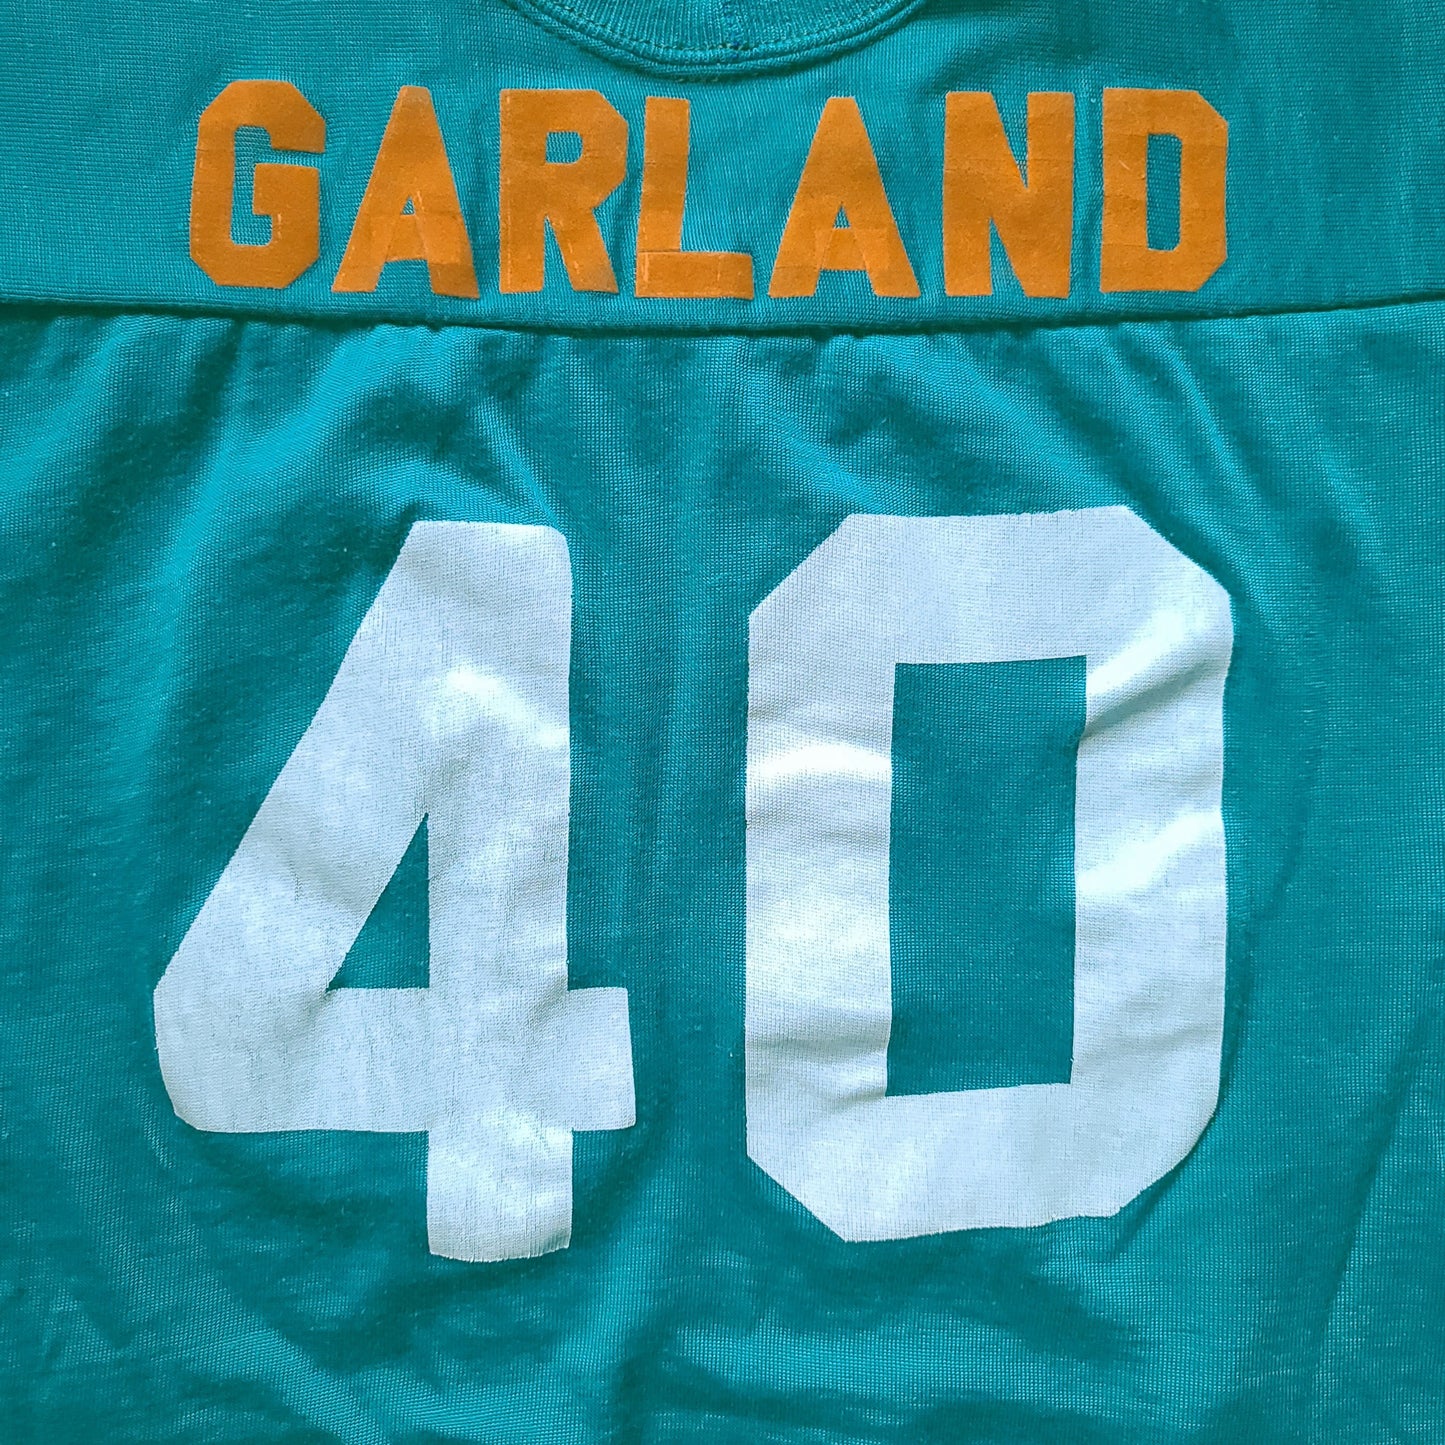 Miami Dolphins 70S/80S Rawlings Garland Jersey